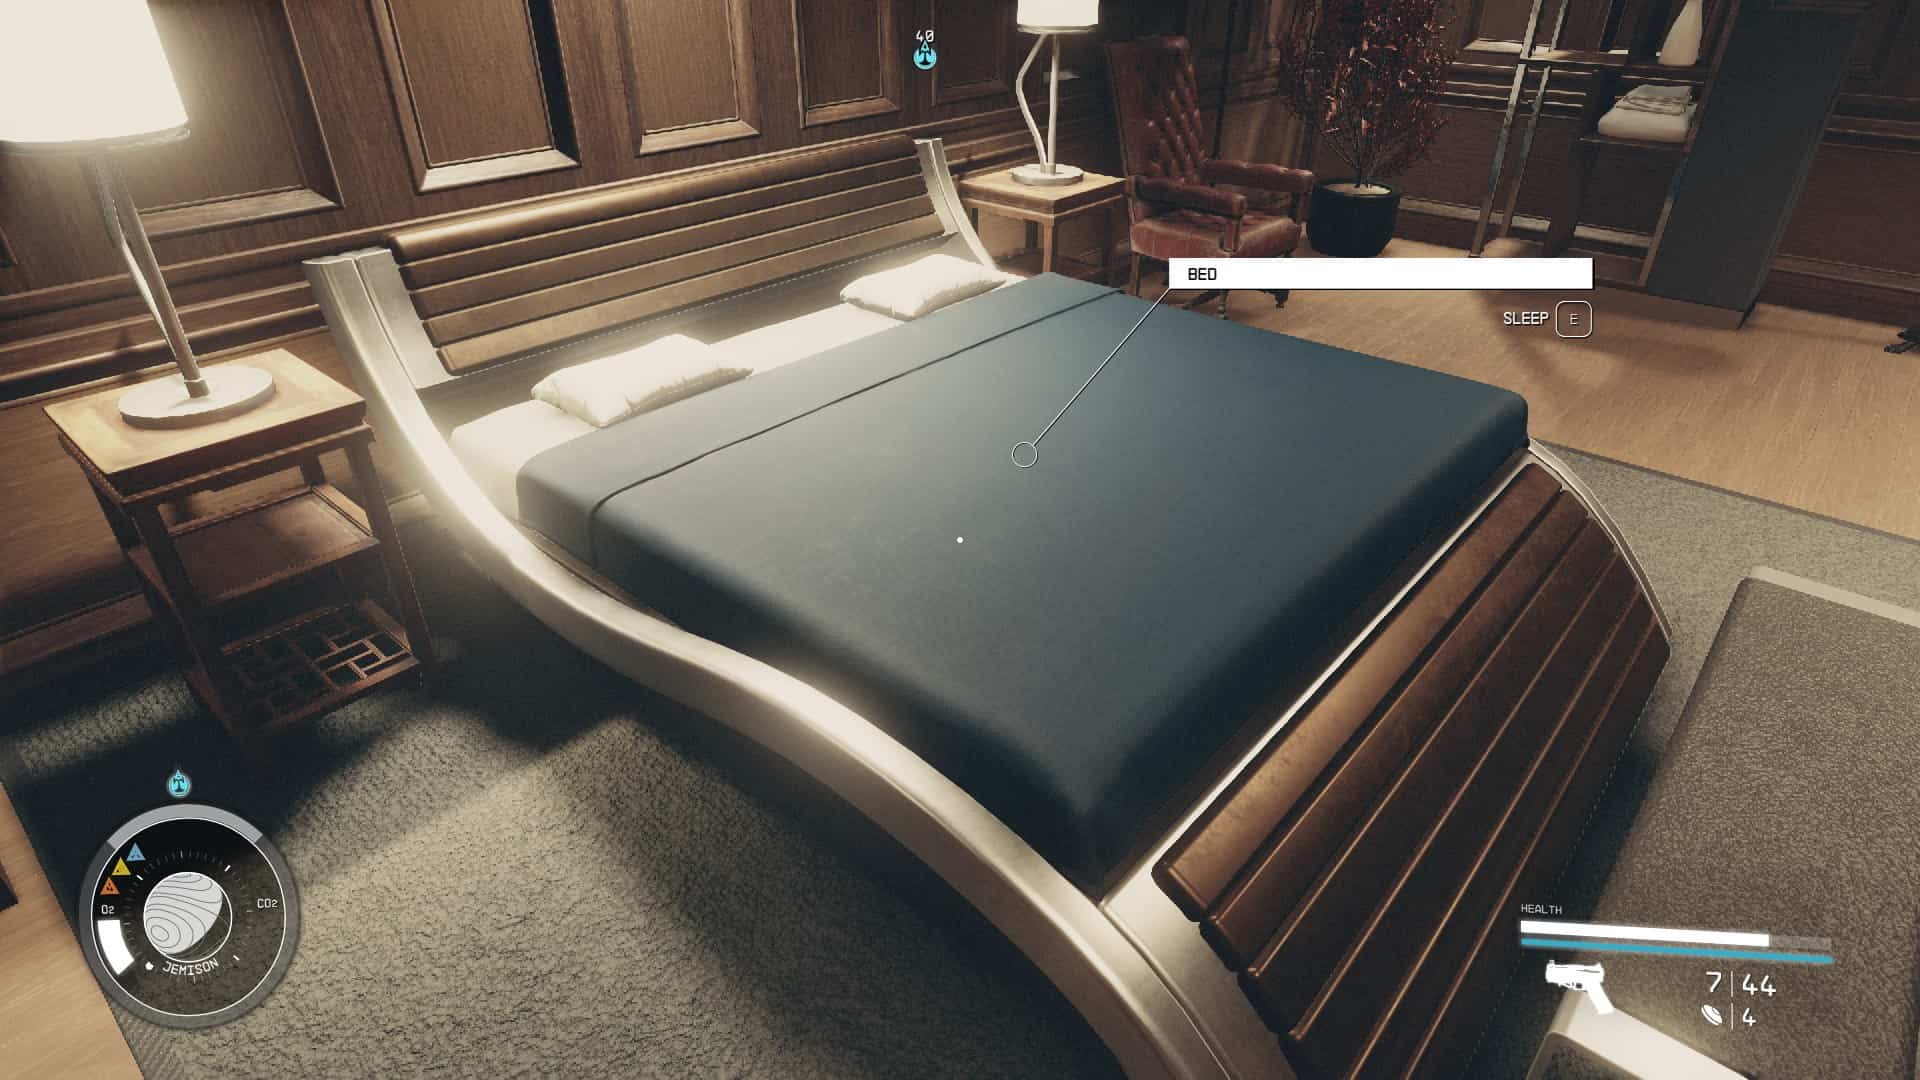 Starfield tips and tricks: The player's bed in their room in The Lodge.